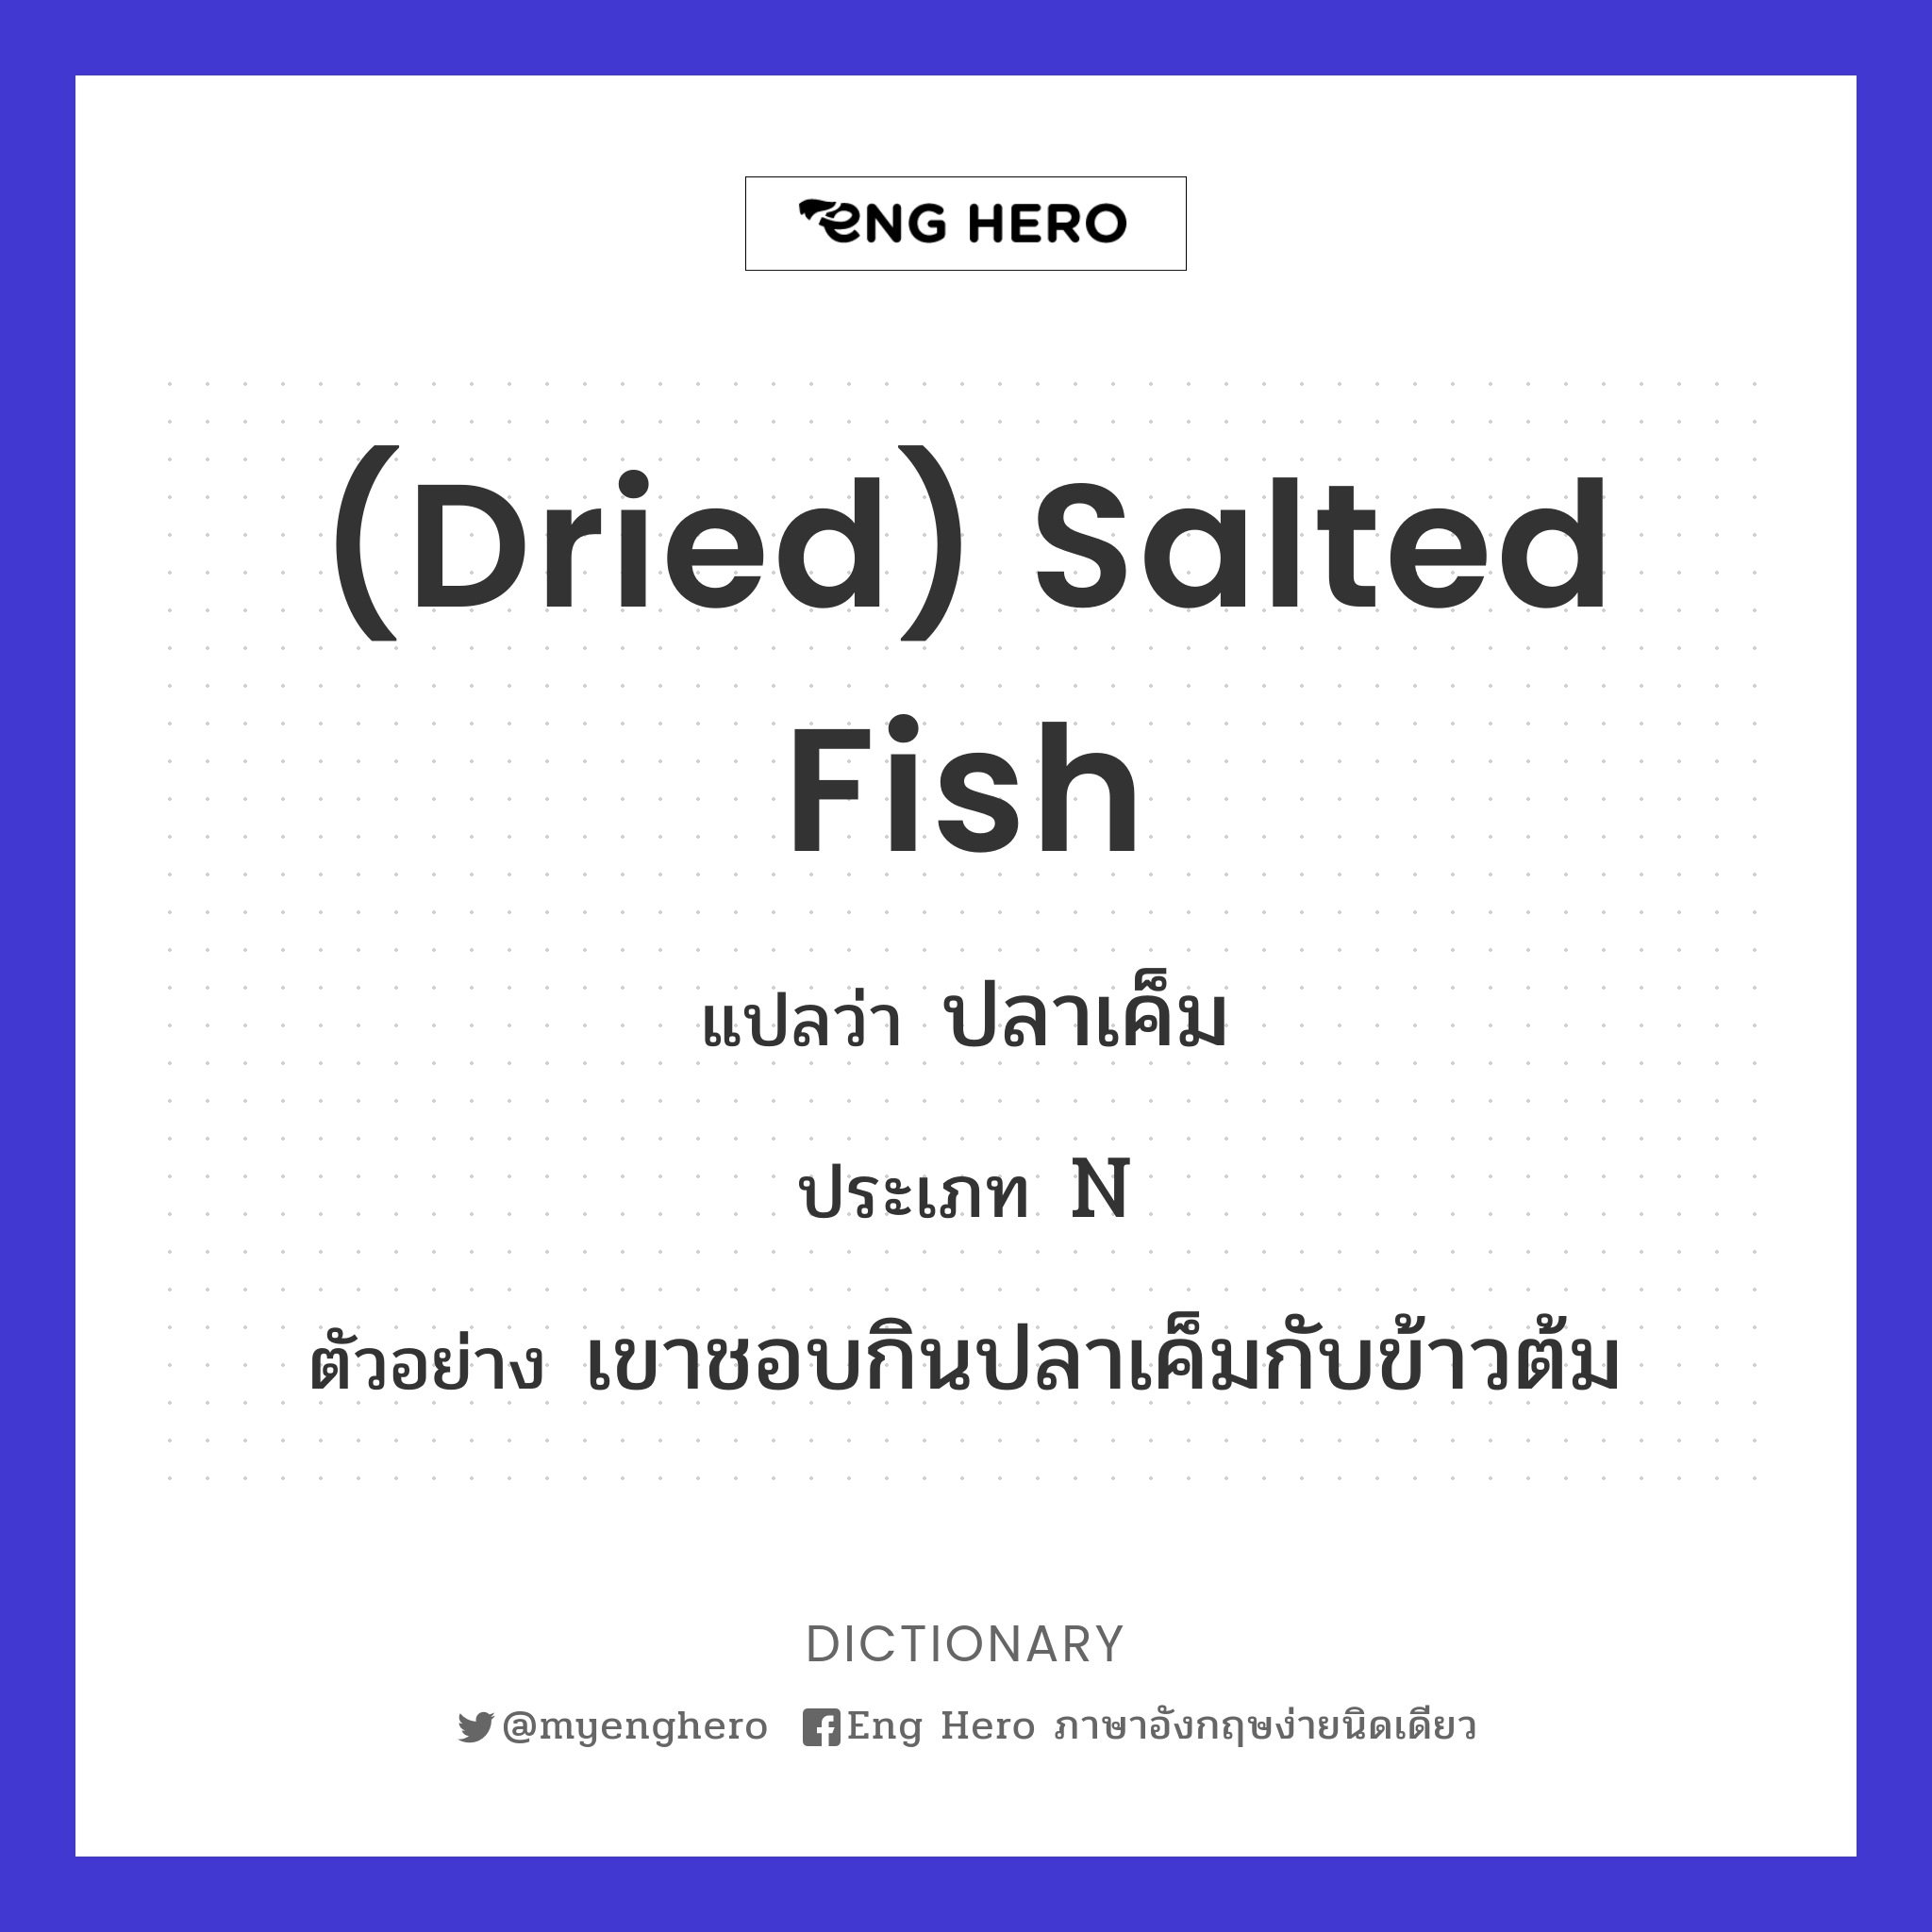 (dried) salted fish